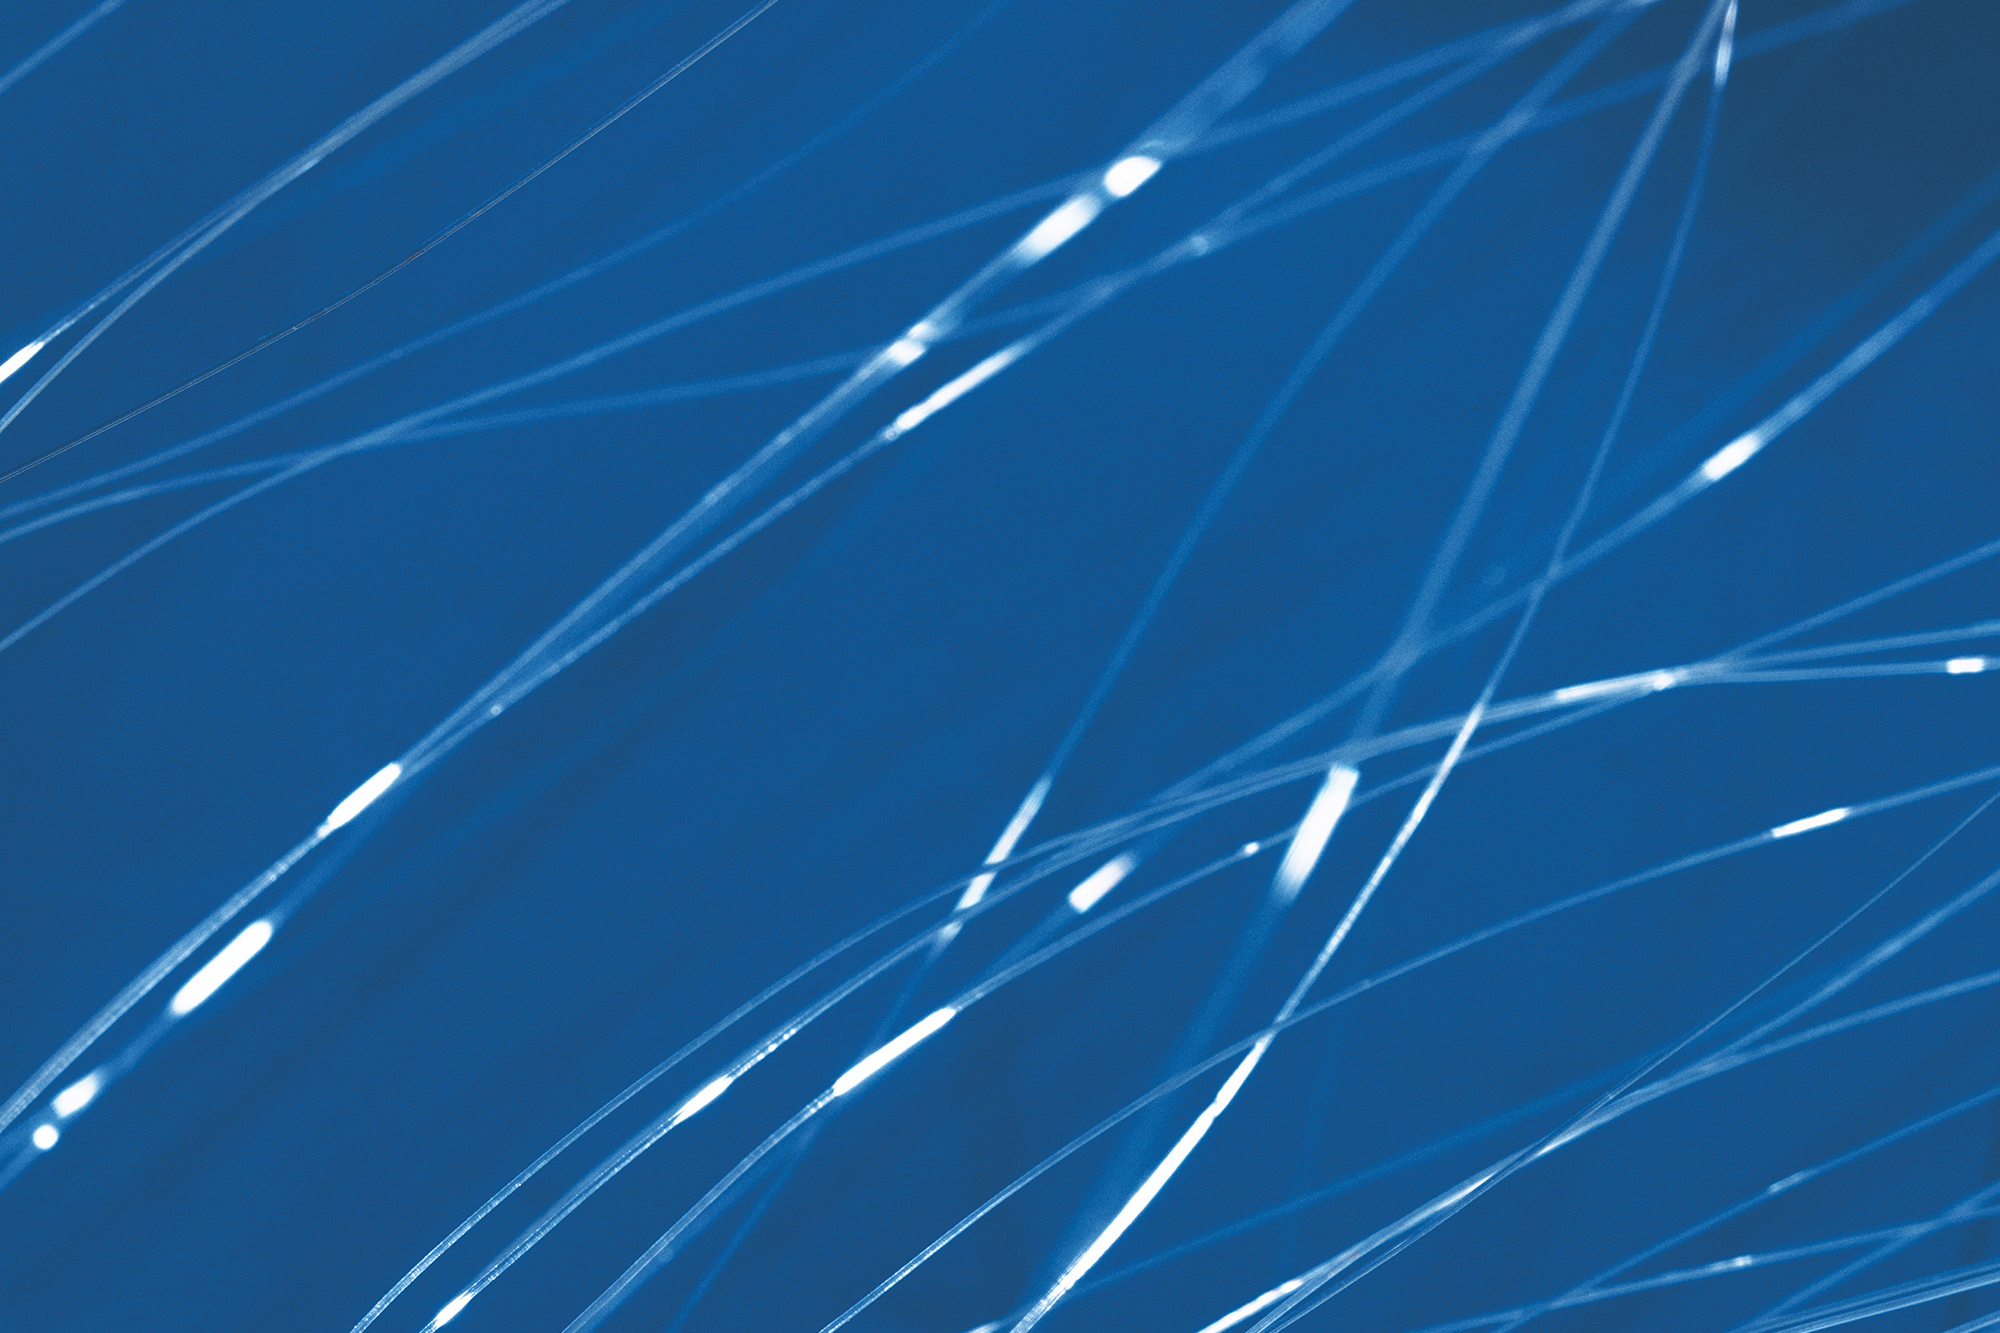 White fibers on a blue background.